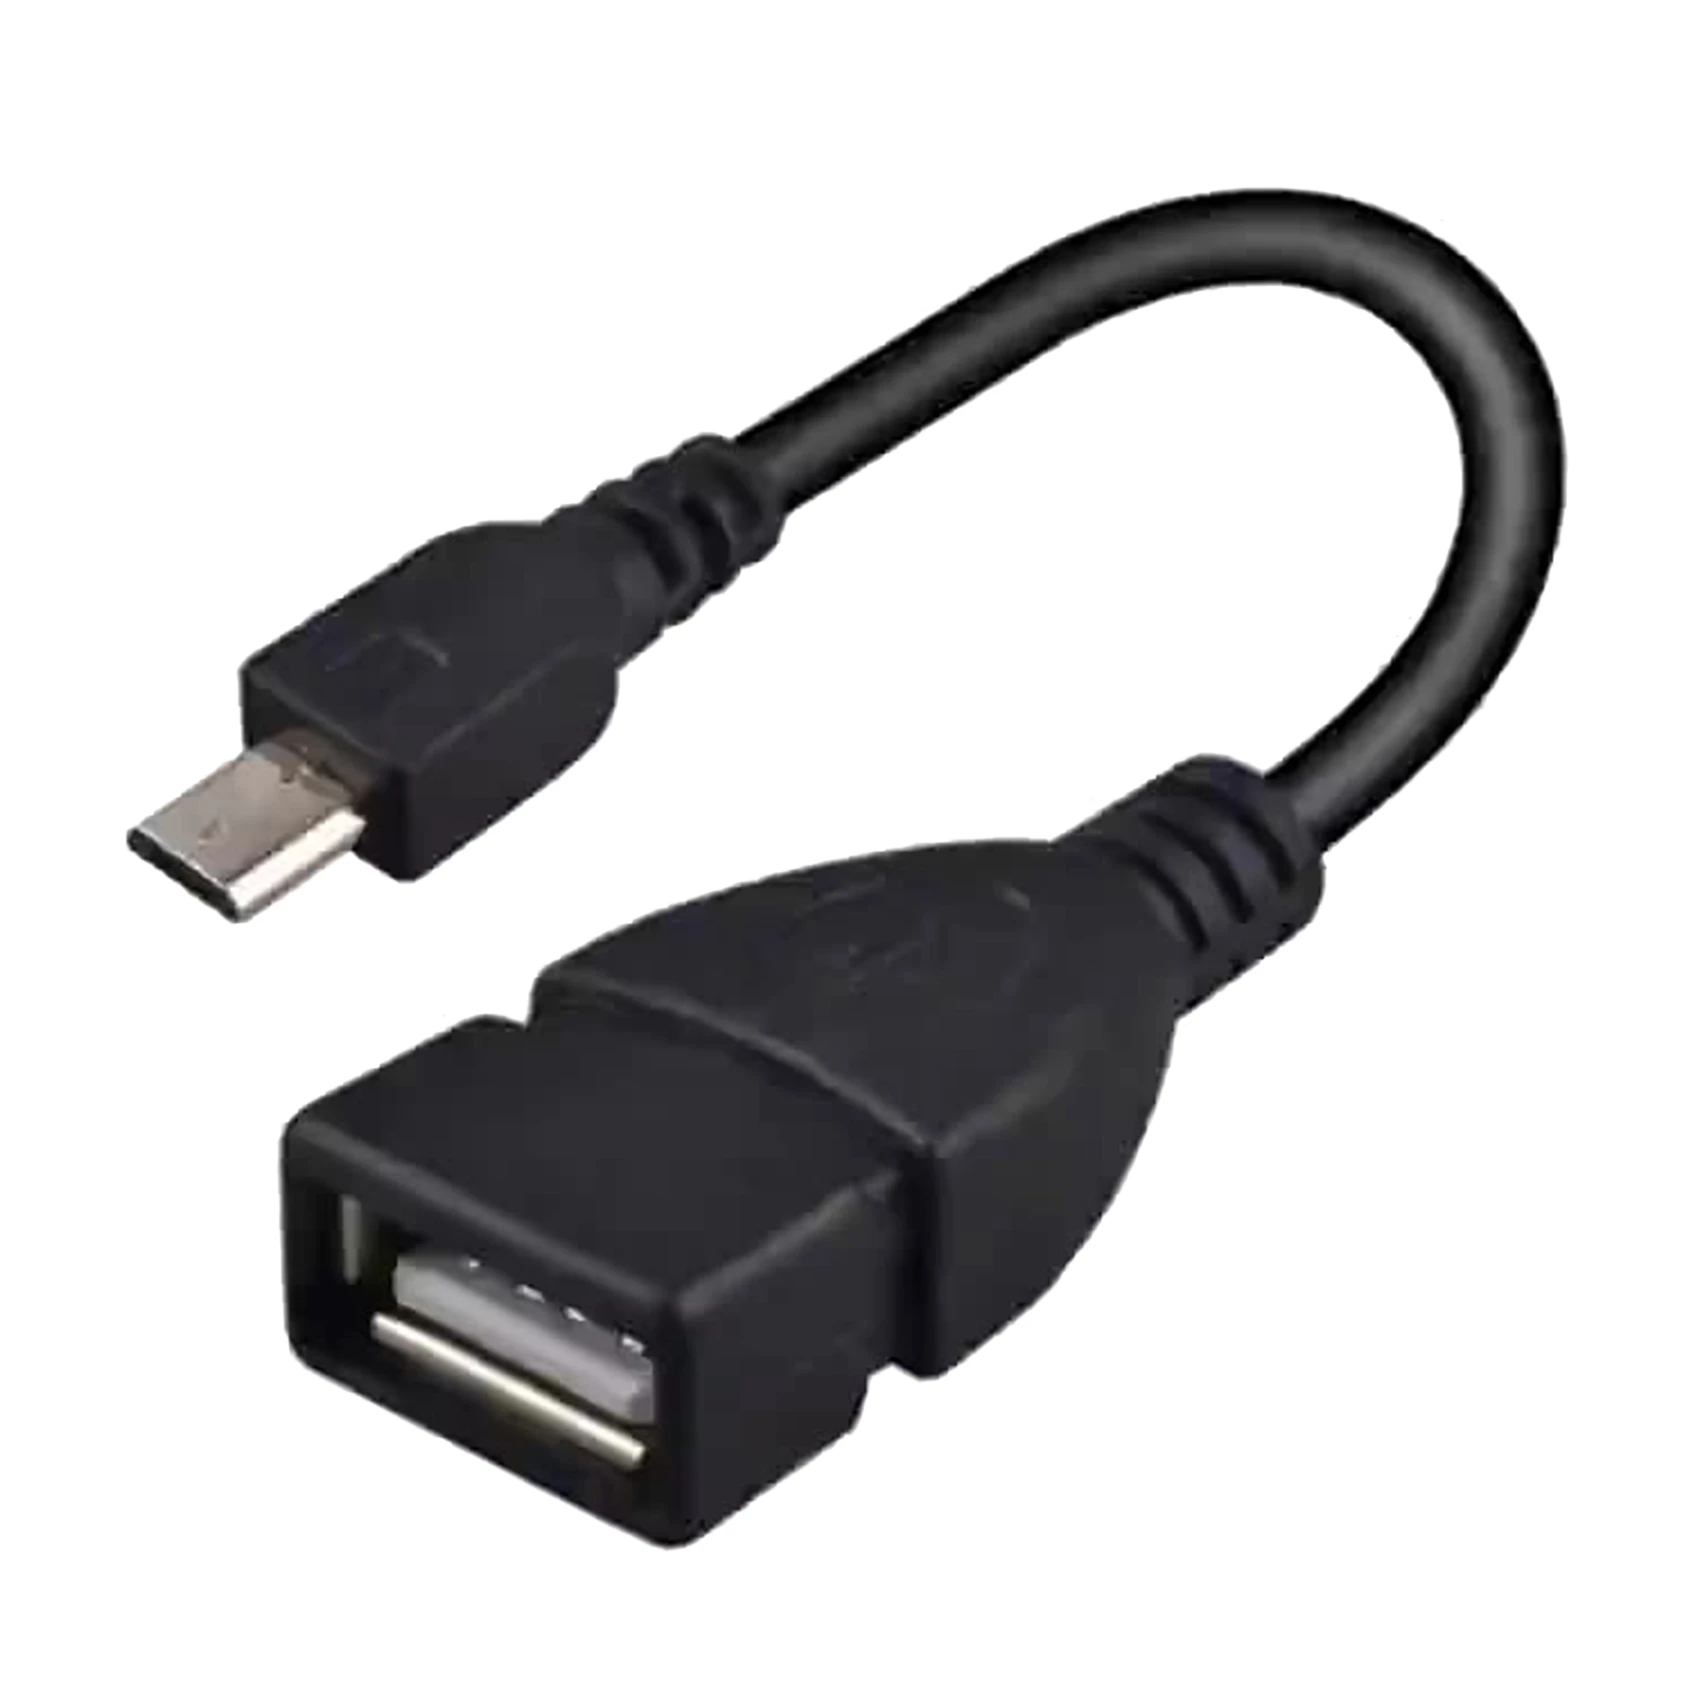 Micro-USB Cable OTG Cable Conversion Adapter Male Micro-USB to Female USB Data Cable Universal for Android Phone